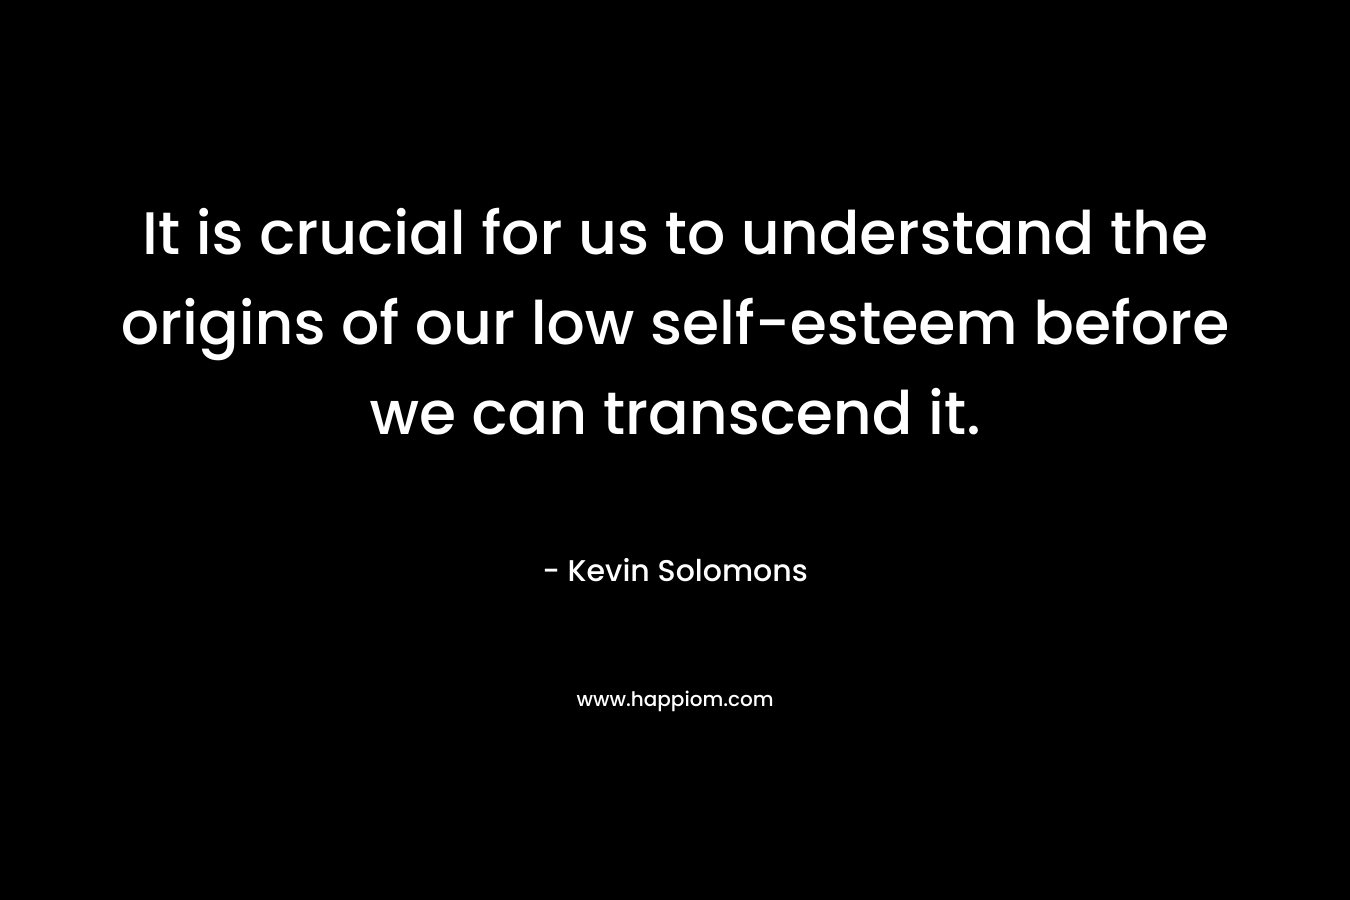 It is crucial for us to understand the origins of our low self-esteem before we can transcend it.